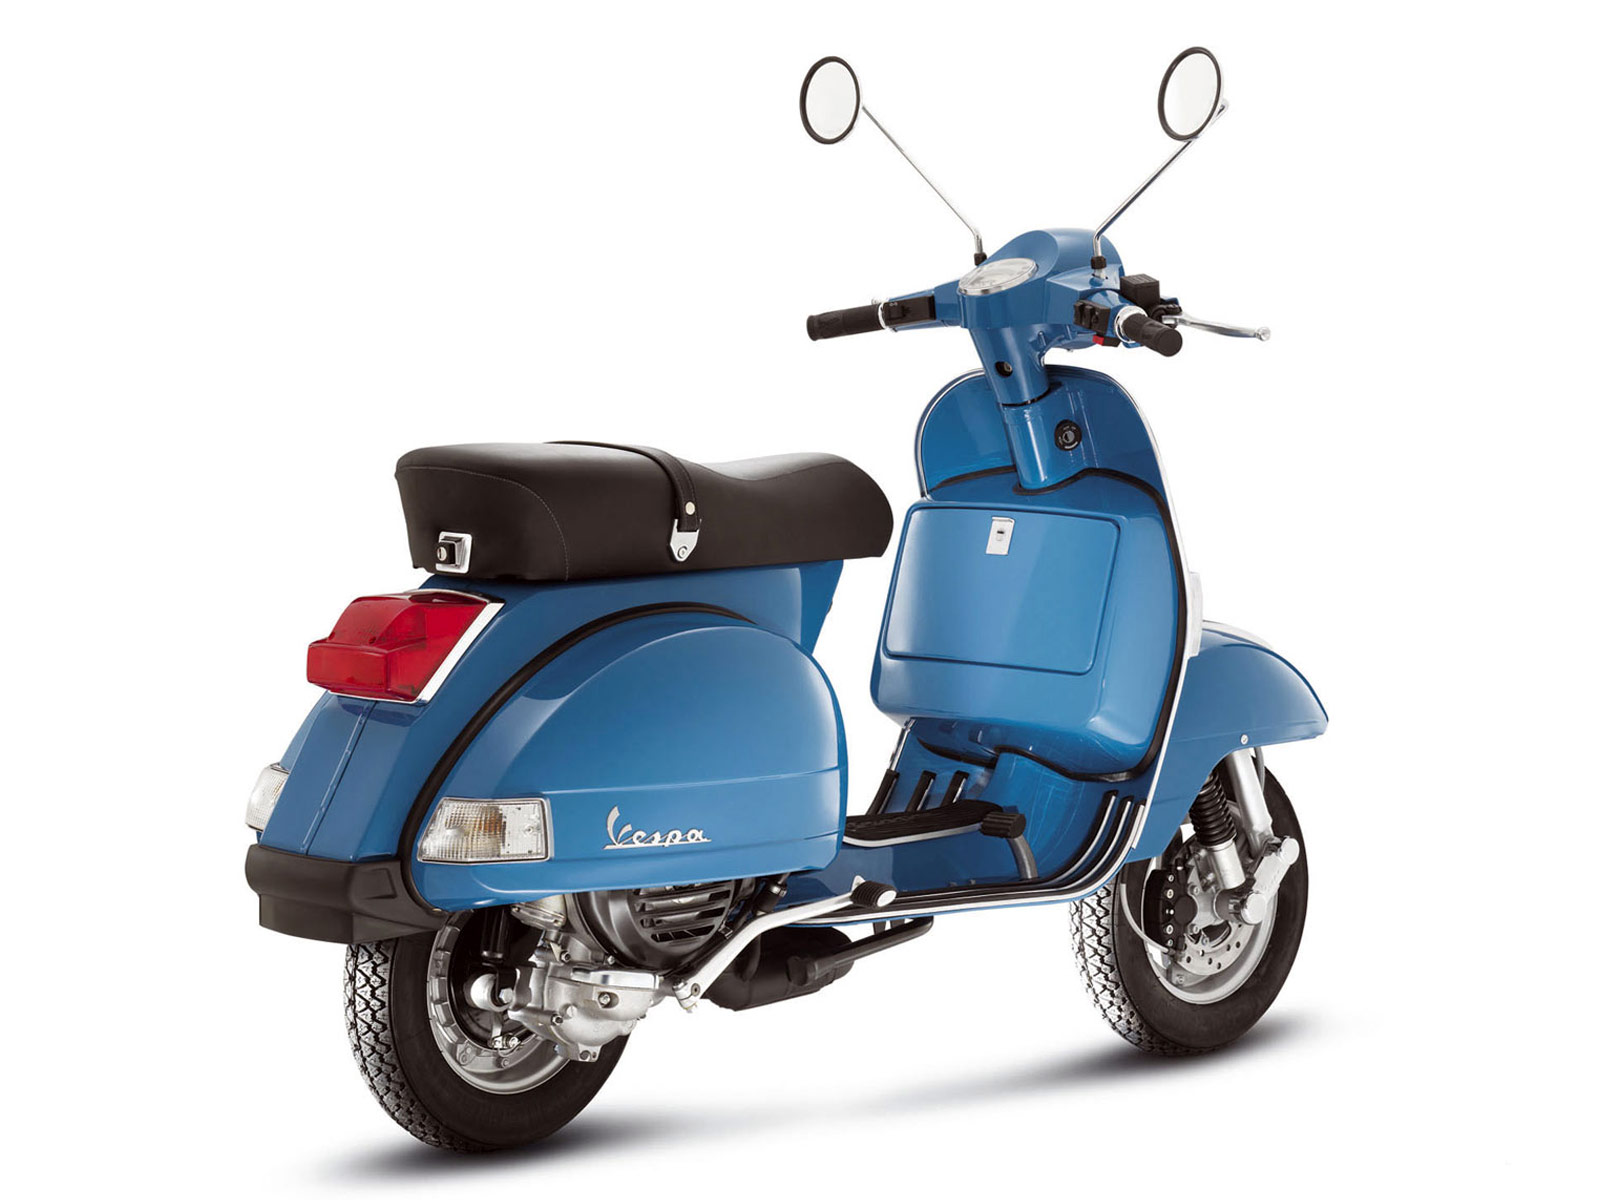 2011 VESPA PX 150 pictures, specifications